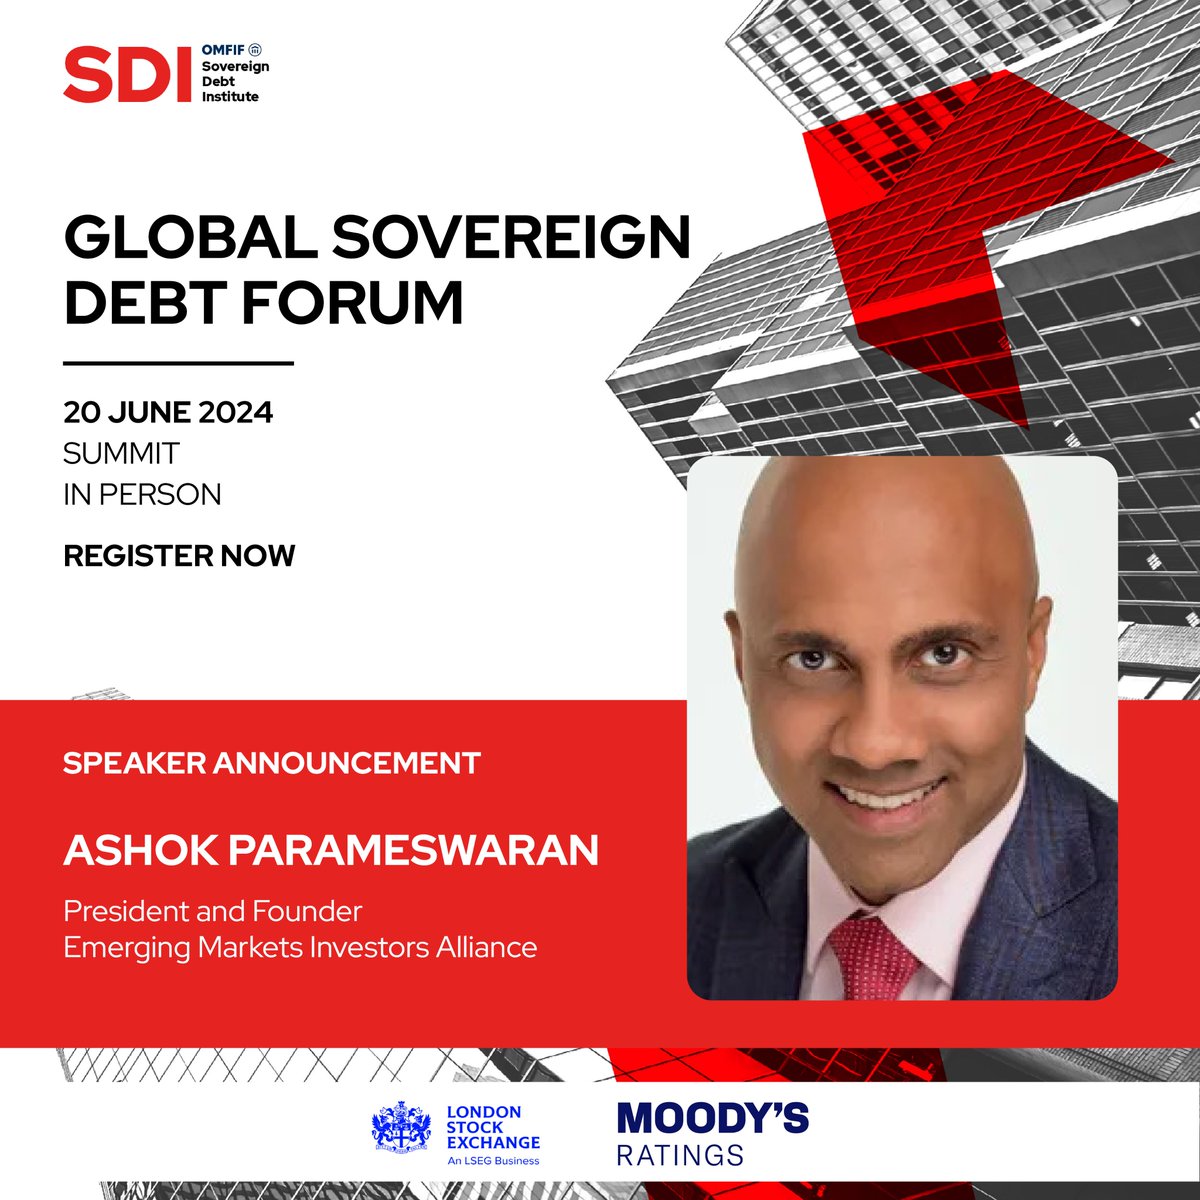 🗣️We are excited to announce that Ashok Parameswaran, President and Founder of @emi_alliance will be speaking at the Global sovereign debt forum. 🔗Find out more about the forum and register to attend here: omfif.org/global-soverei…